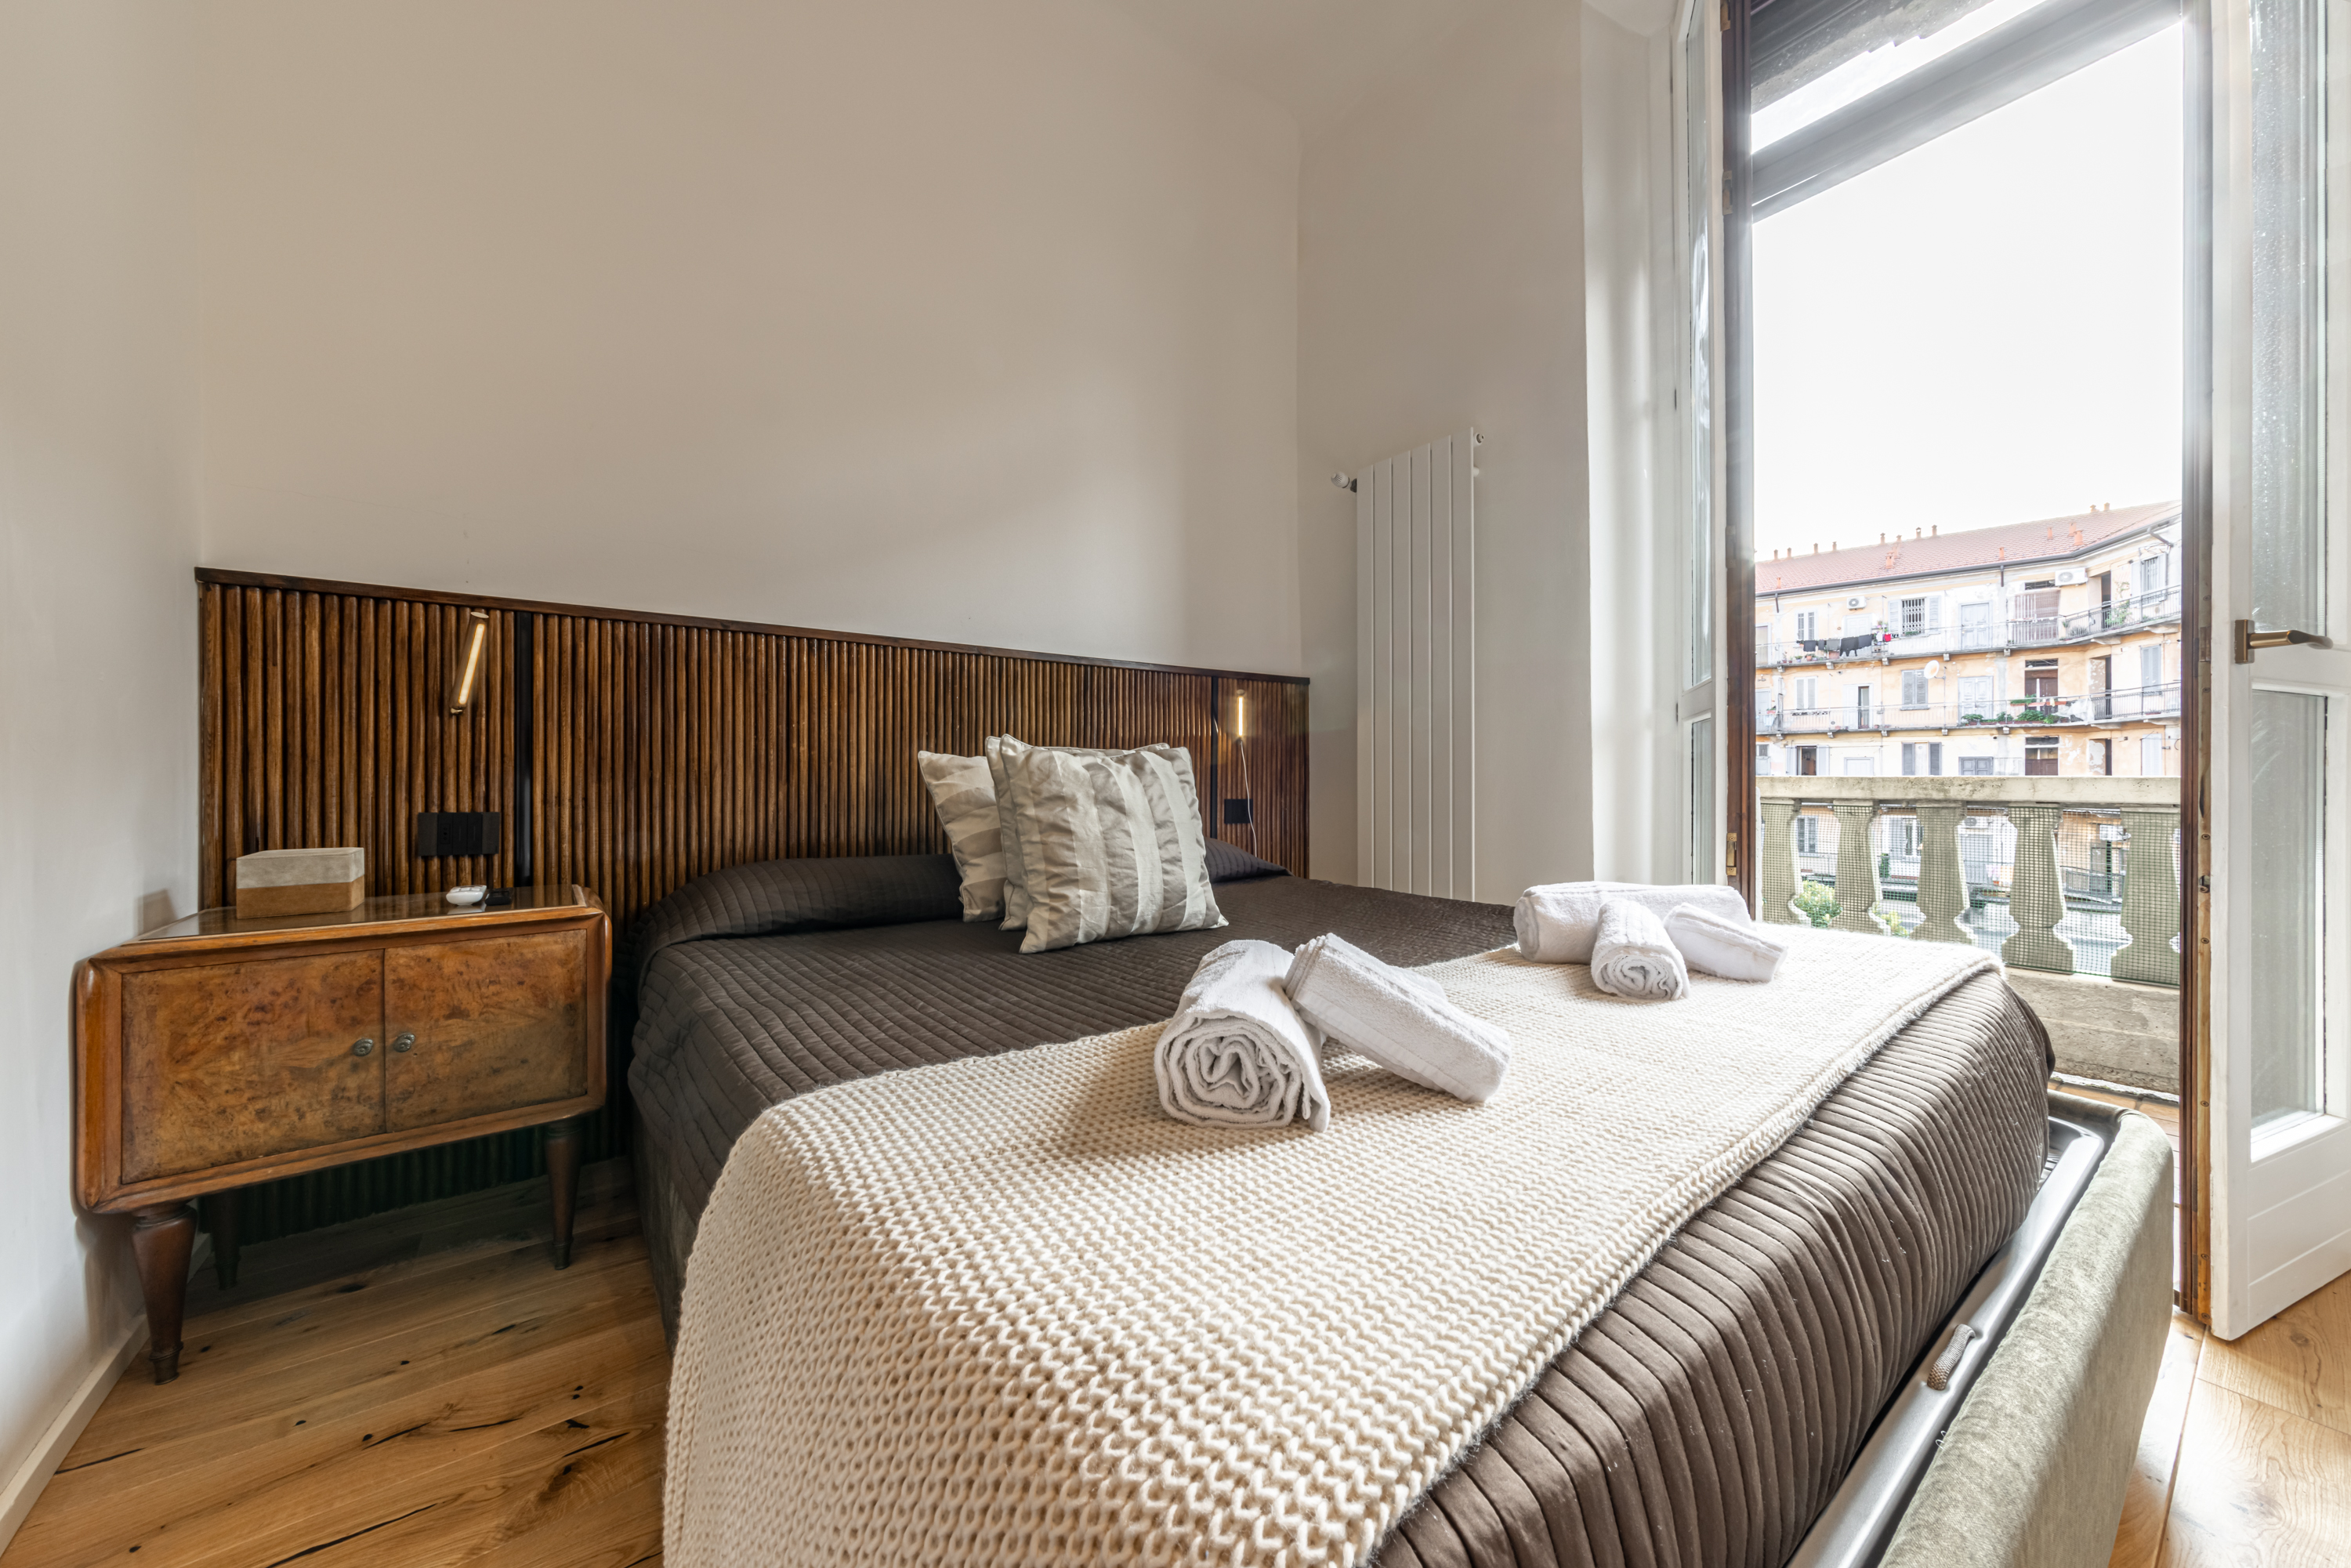 Luxury Design Apt, Comfy w/ A/C, WiFi & Netflix - Apartments for Rent in  Milano, Lombardia, Italy - Airbnb